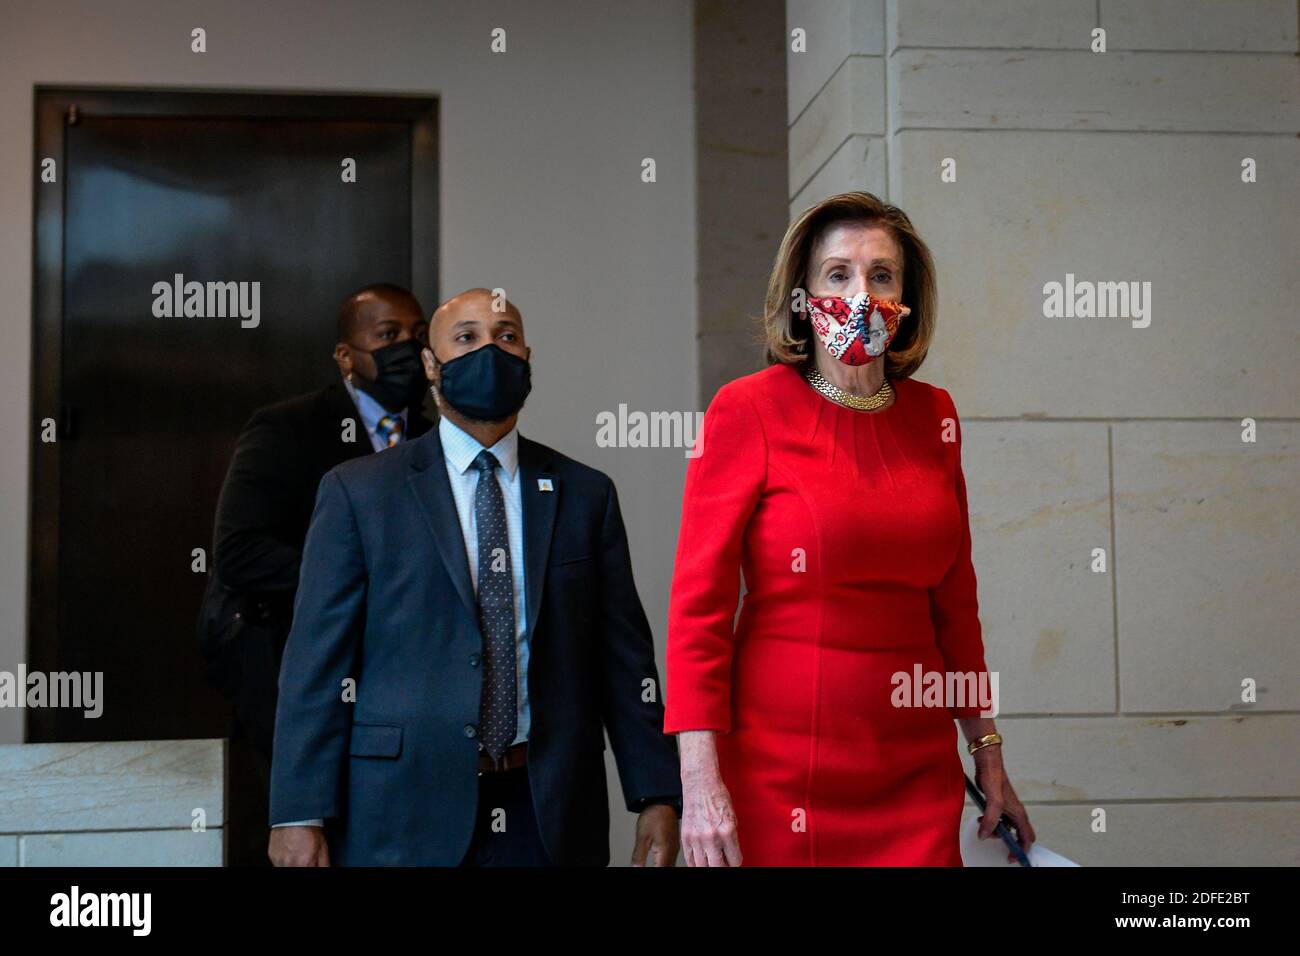 Speaker of the United States House of Representatives Nancy Pelosi (Democrat of California) arrives for her press conference at the U.S. Capitol in Washington, DC., Friday, December 4, 2020. Credit: Rod Lamkey/CNP /MediaPunch Stock Photo